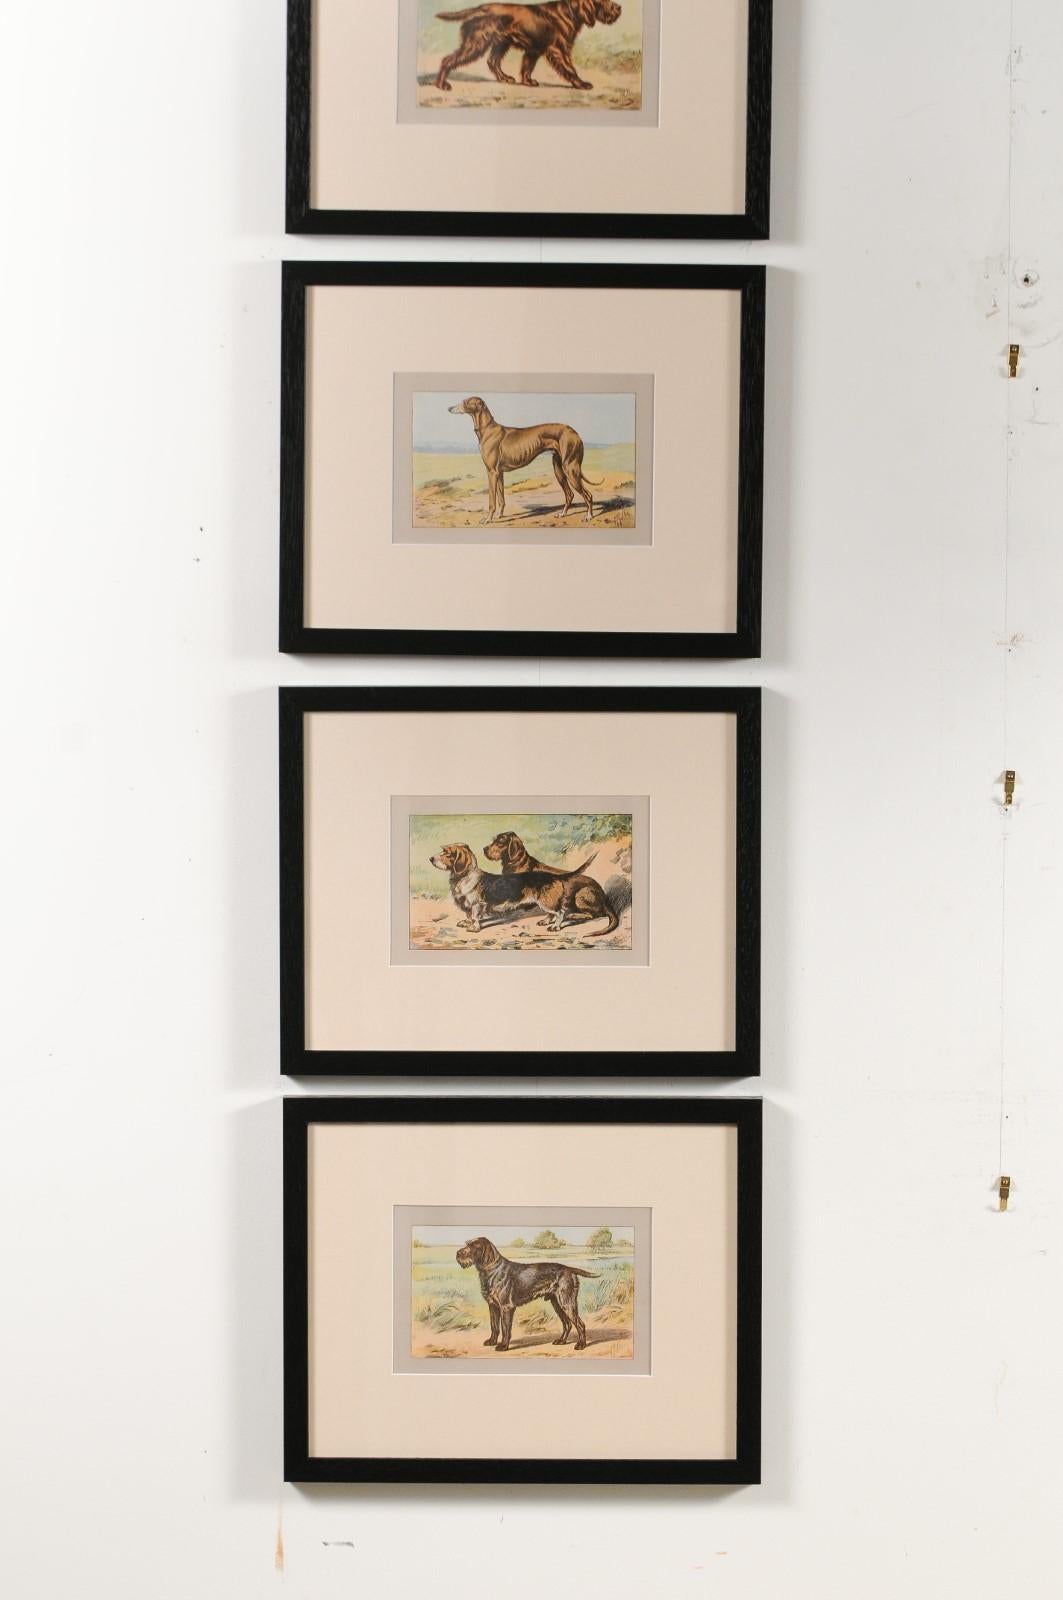 P. Mahler Custom Framed Lithographs Depicting Hunting Dogs in Outdoor Scenes 1